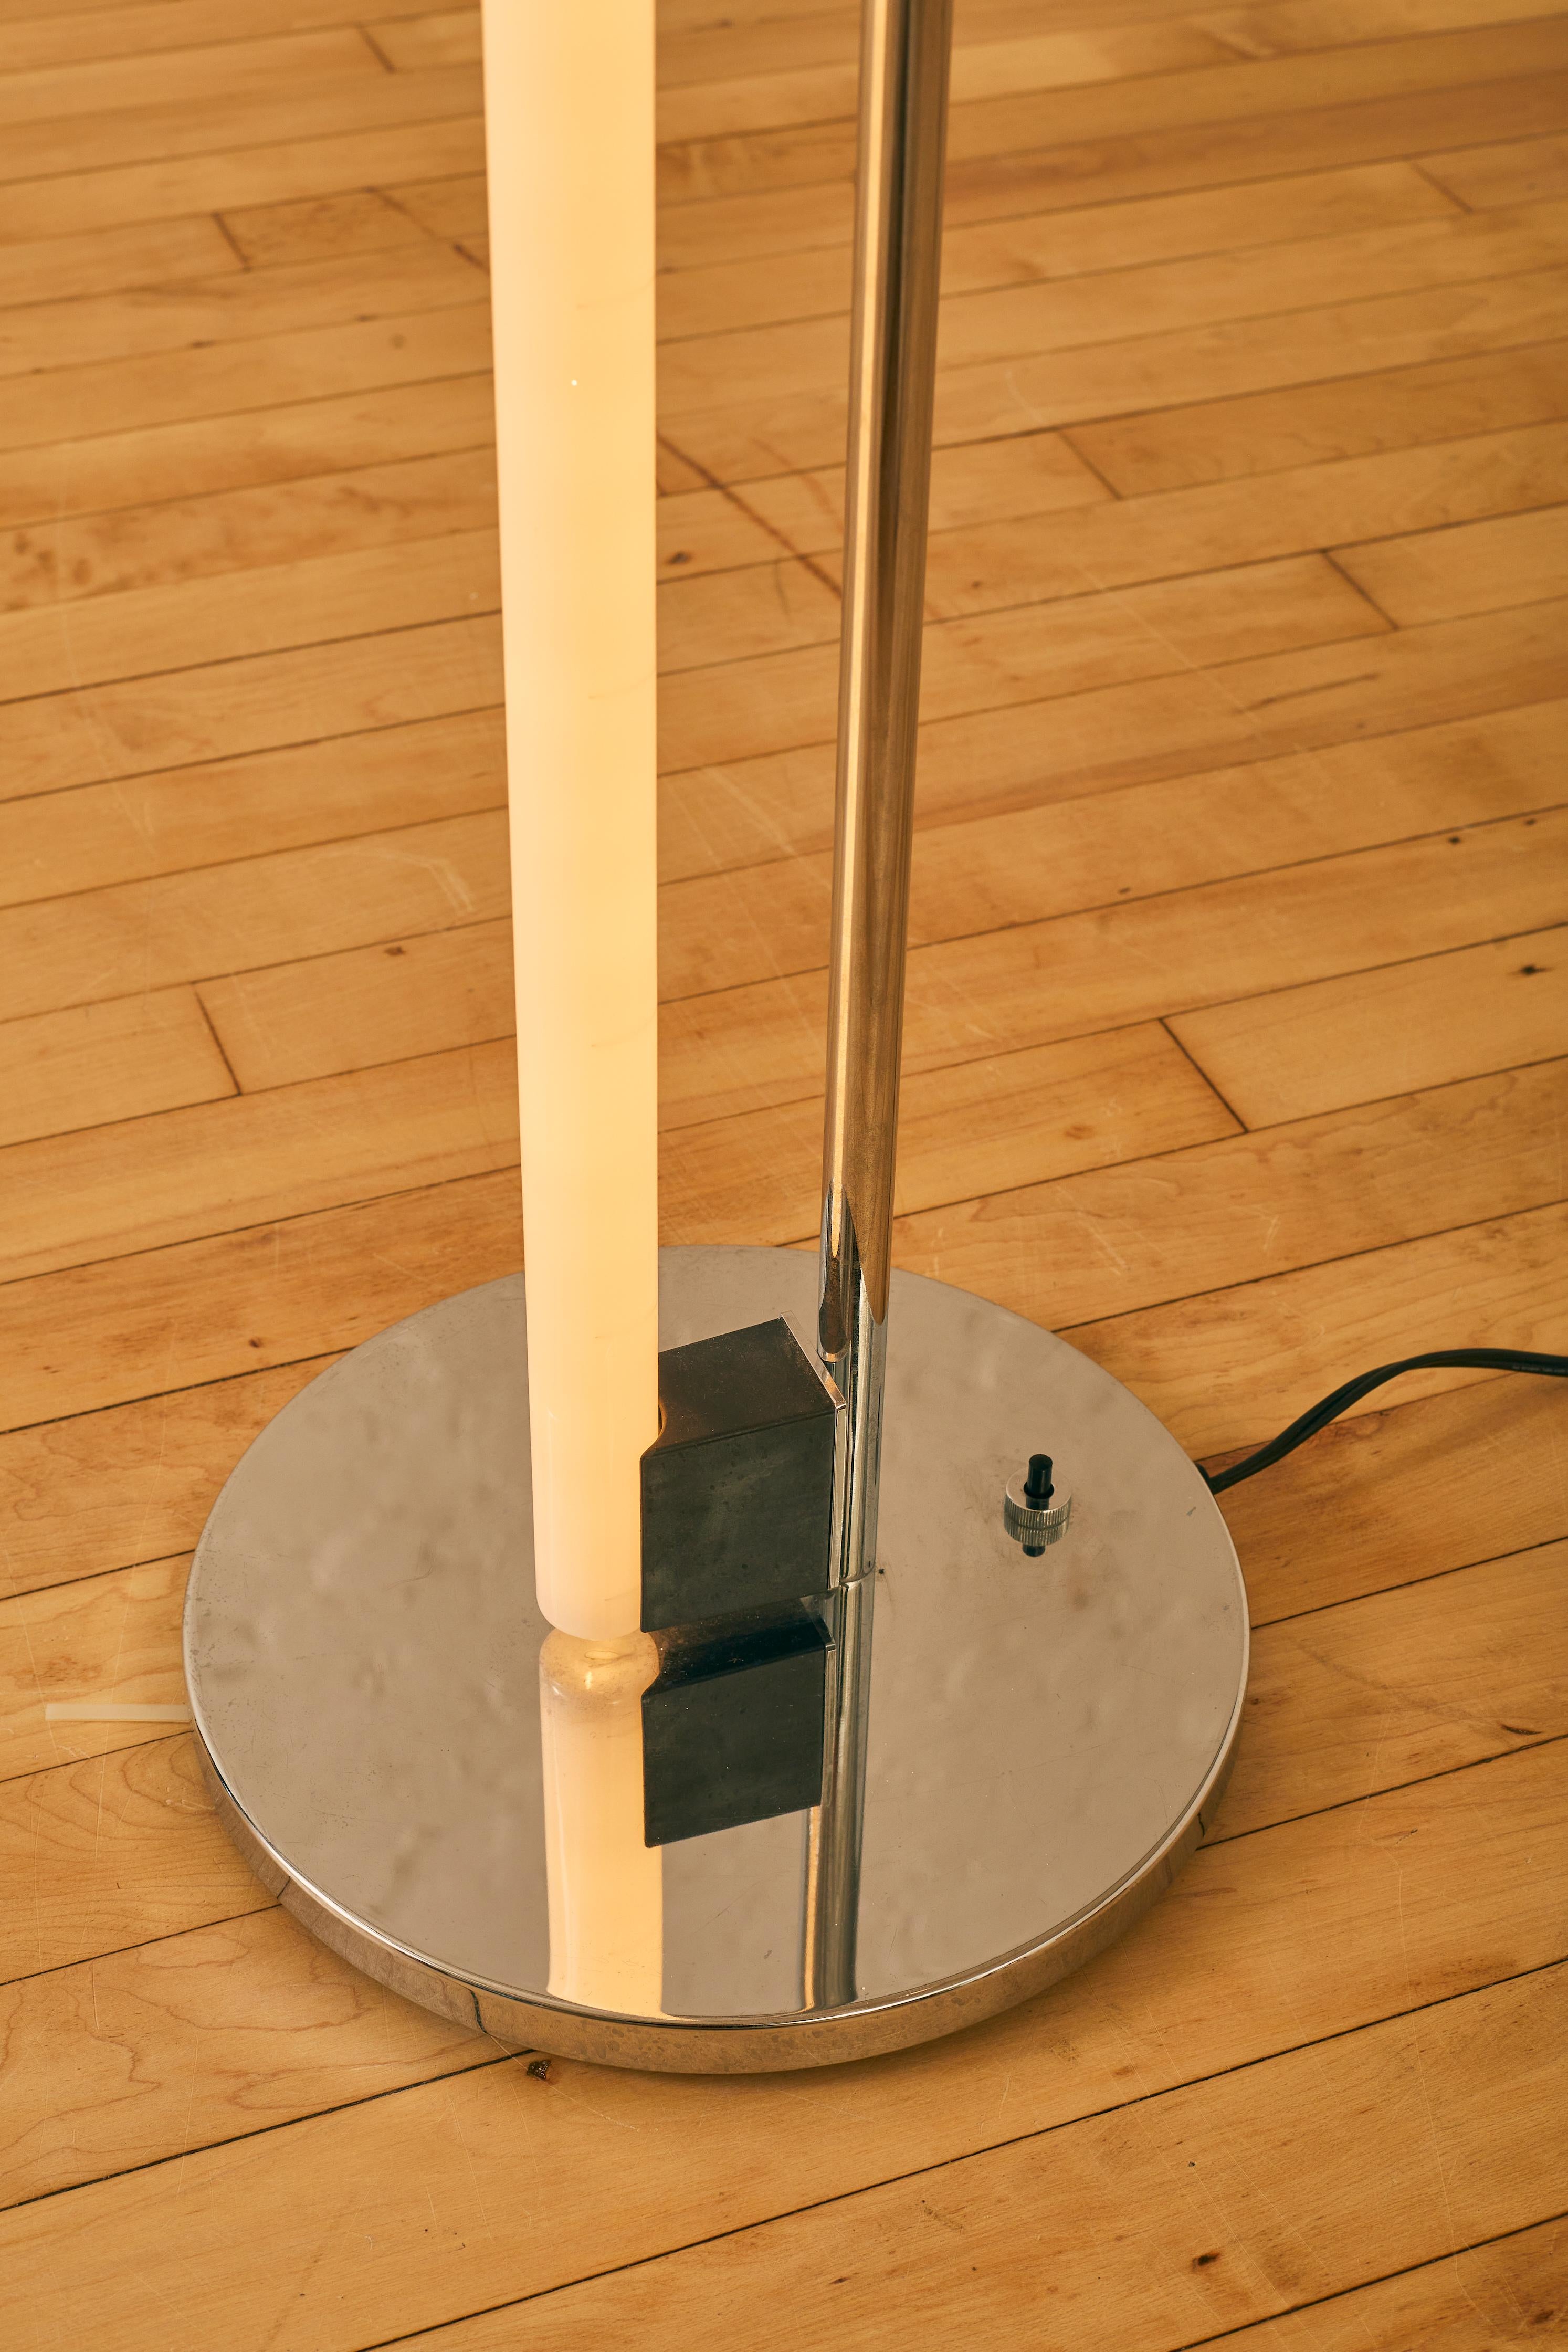 Standing Tube Light by Eileen Grey. Labeled Classicon Munich on the underside.

